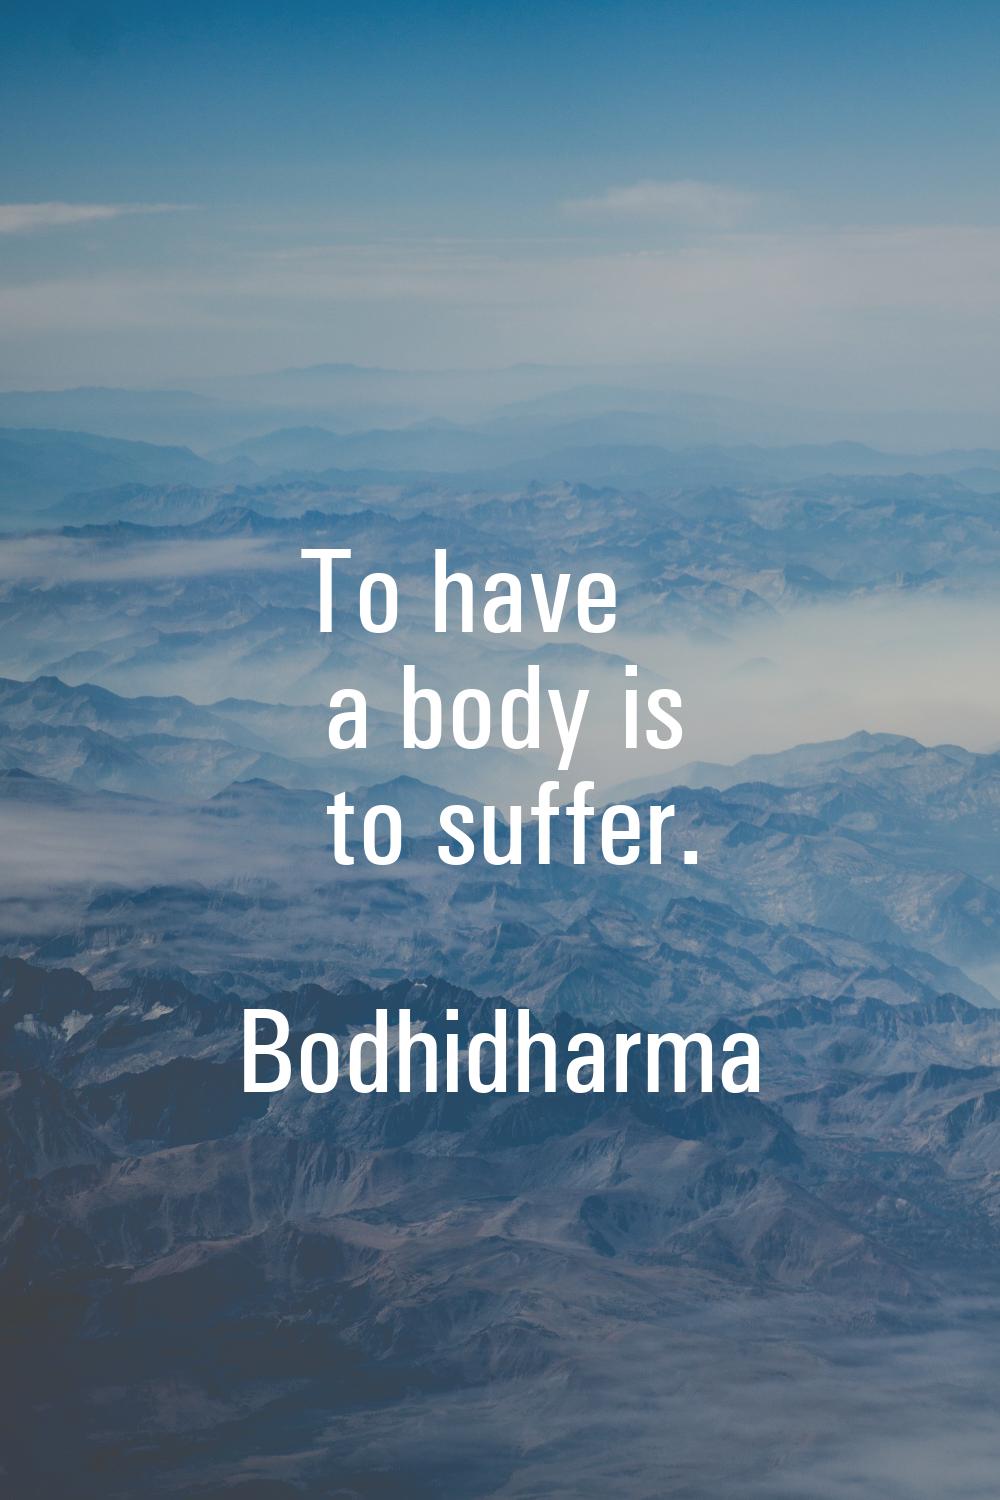 To have a body is to suffer.